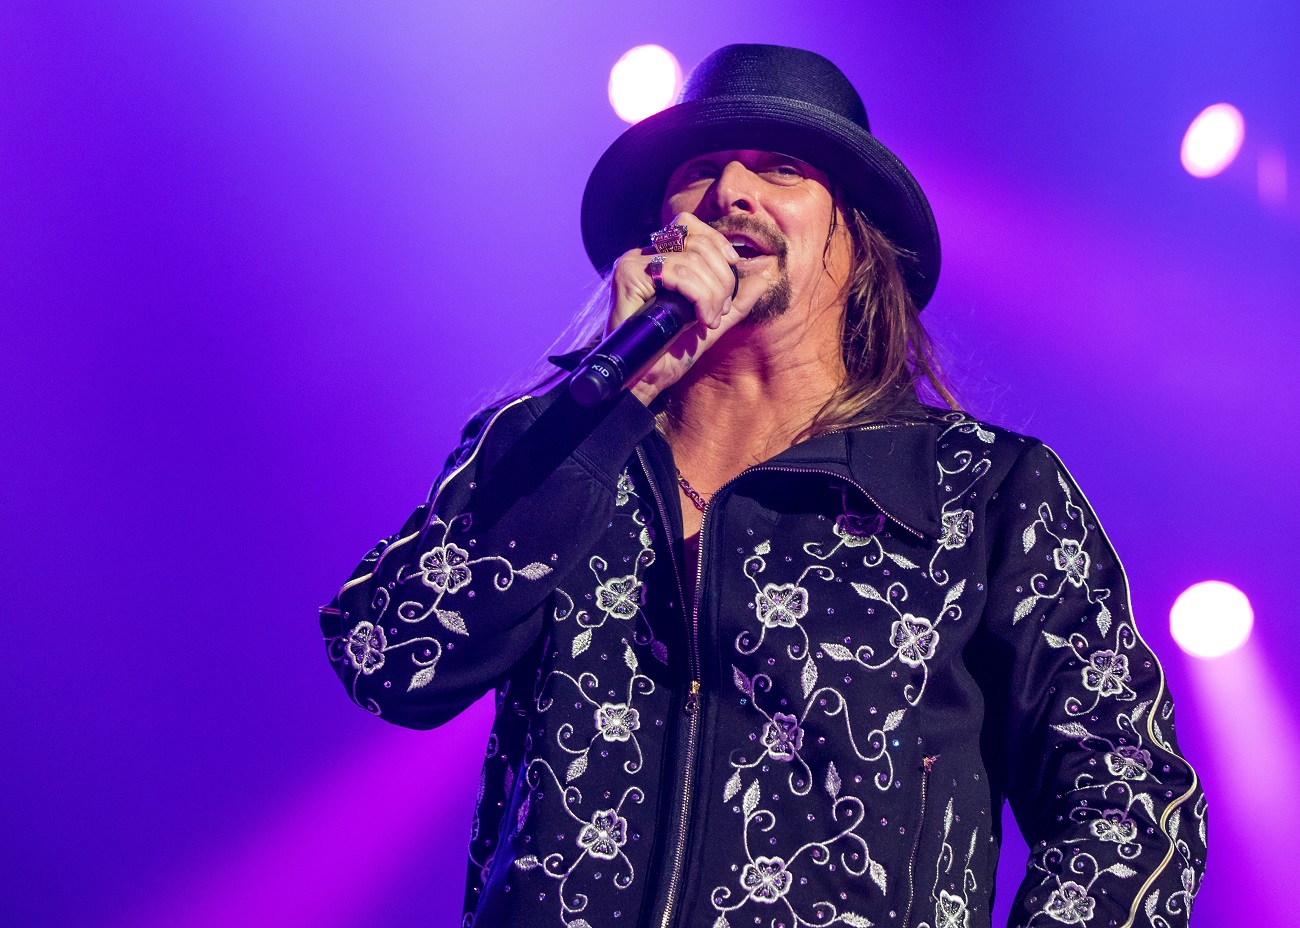 Kid Rock, seen here performing on stage in a black and white jacket, did not apologize for his comments about Oprah.